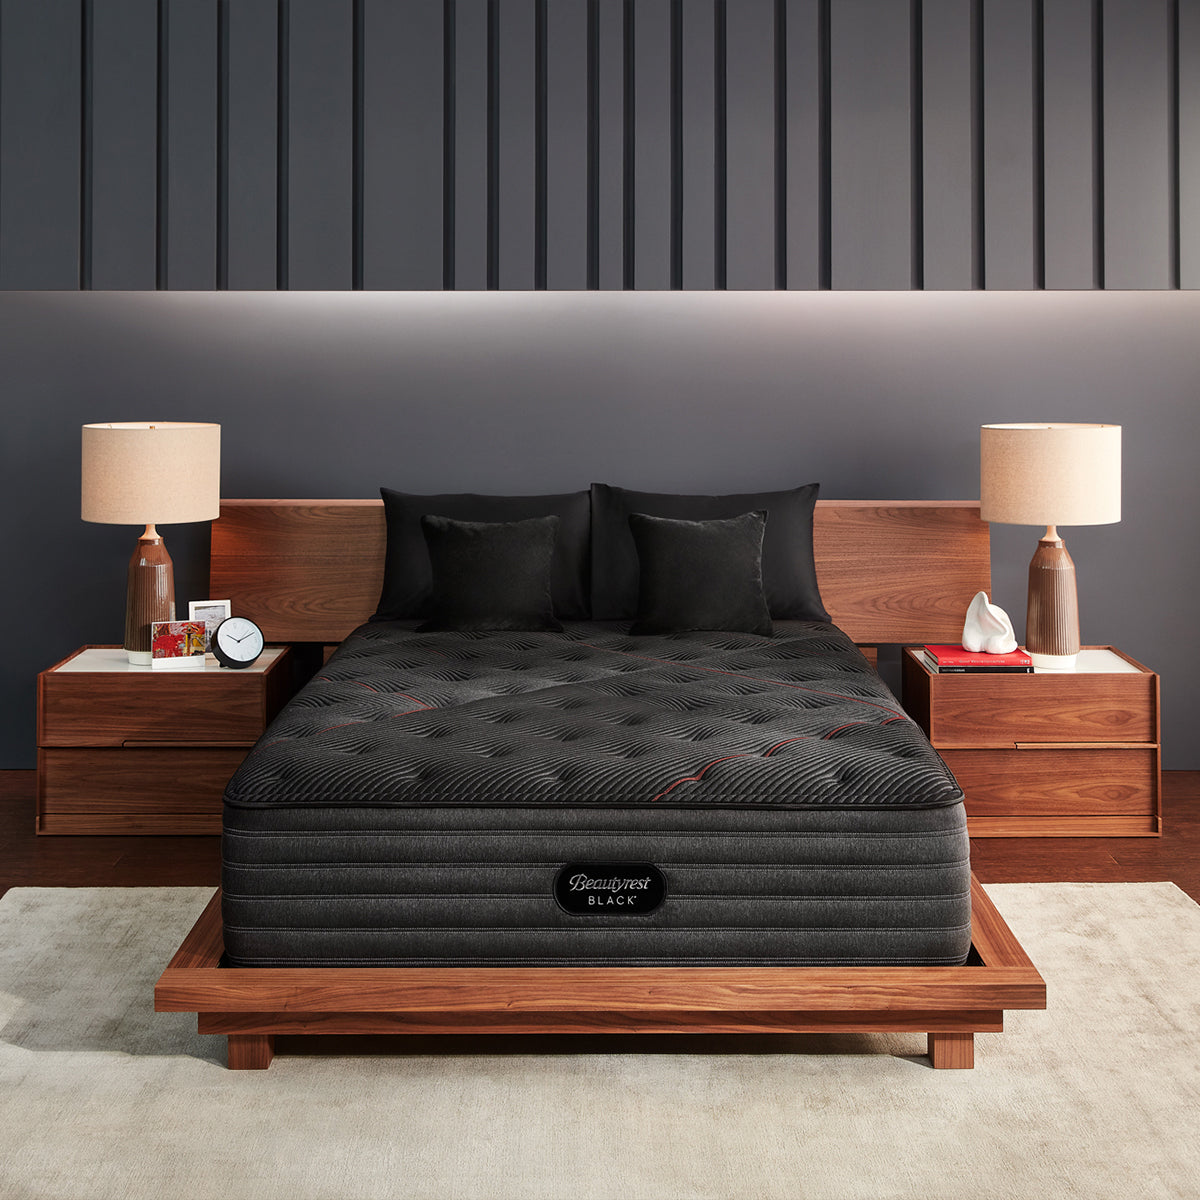 Beautyrest Black C-Class Plush Mattress On Bed Frame In Bedroom Front View